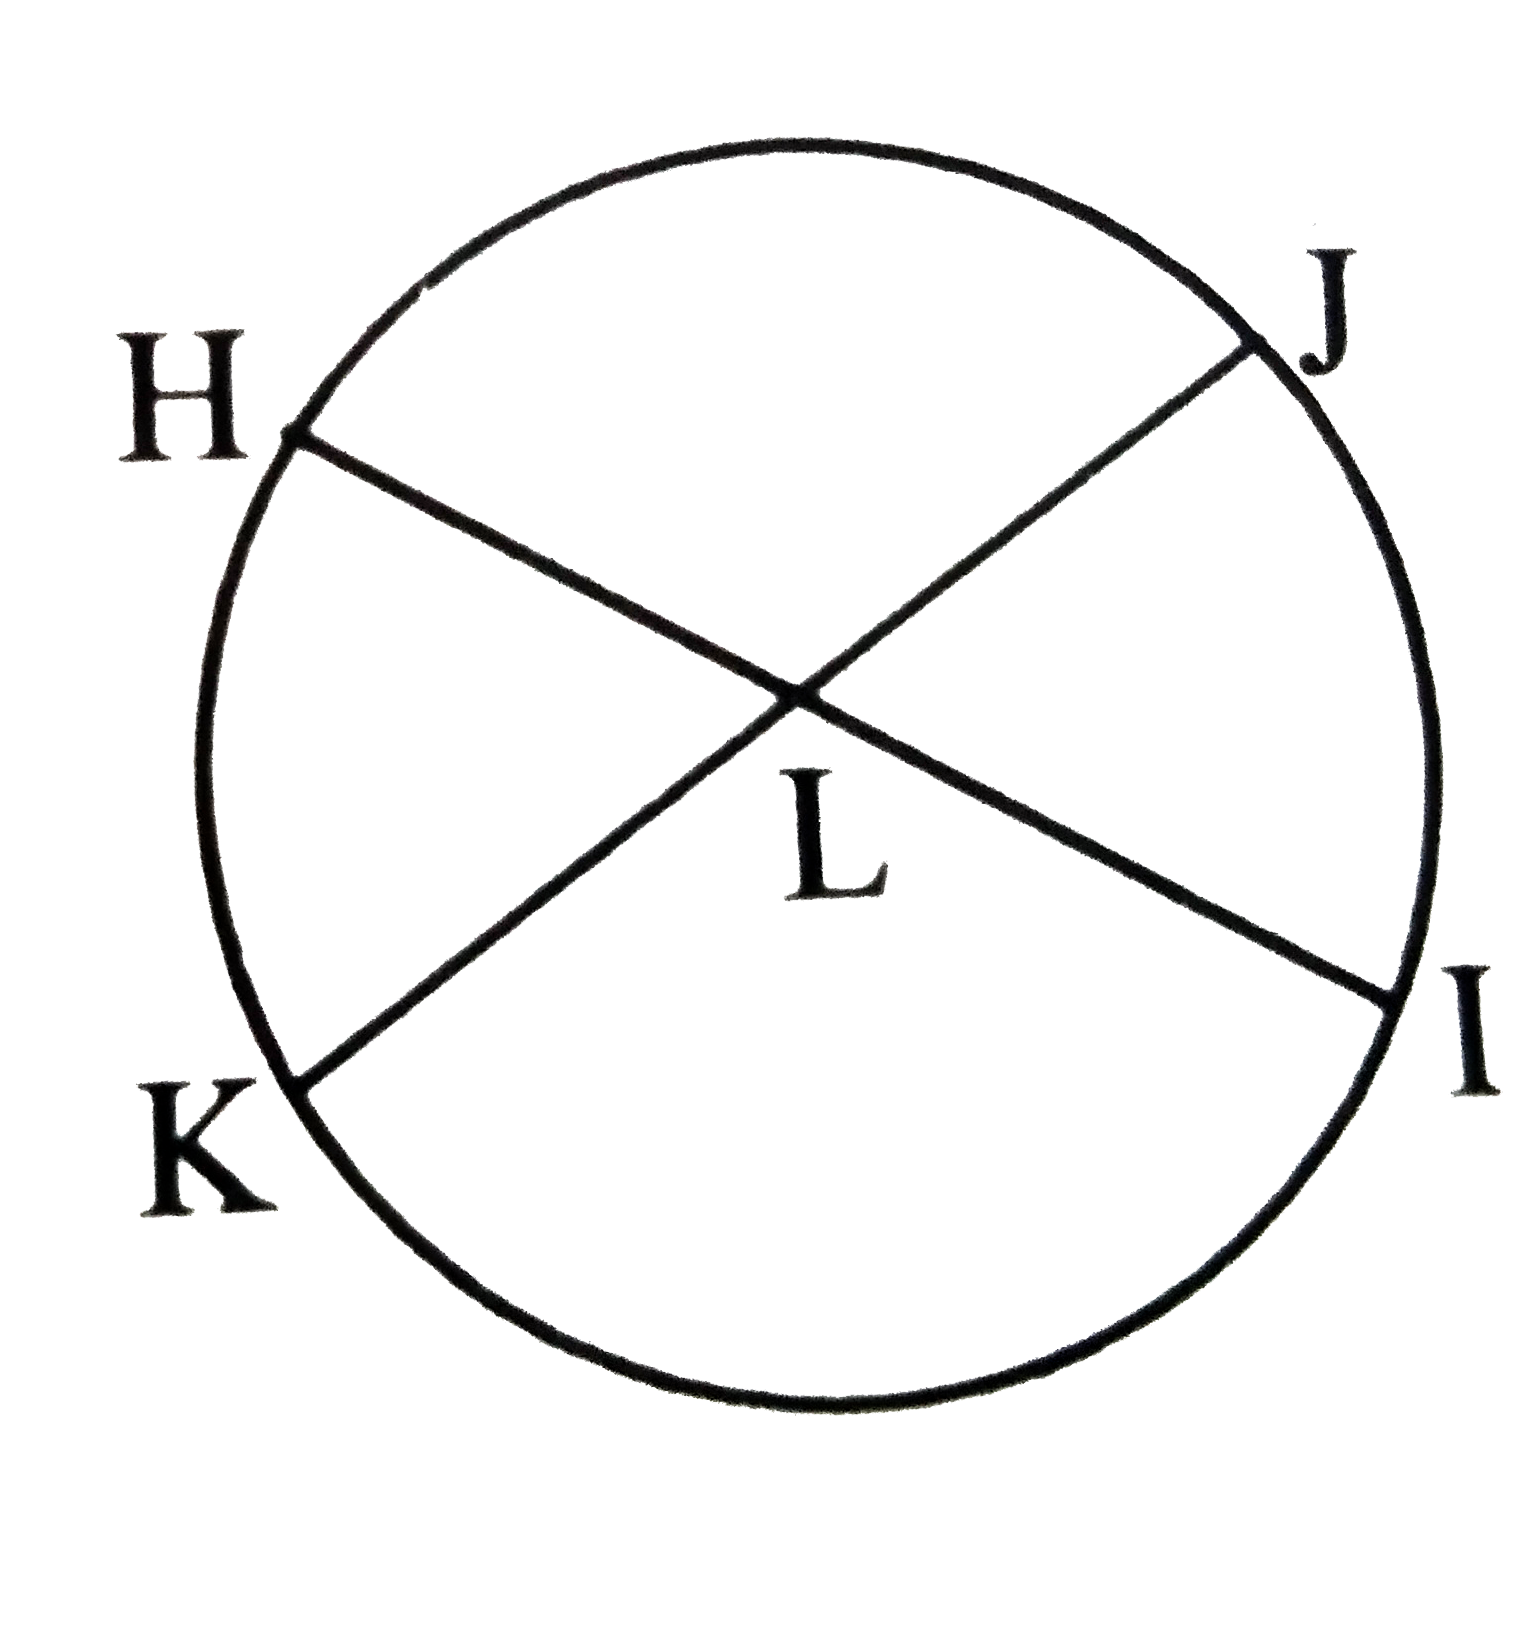 In the adjoining figure , chords HI and KJ intersect at  point L. If KL=8,LJ=5 and HI=14, then find the length of HL.